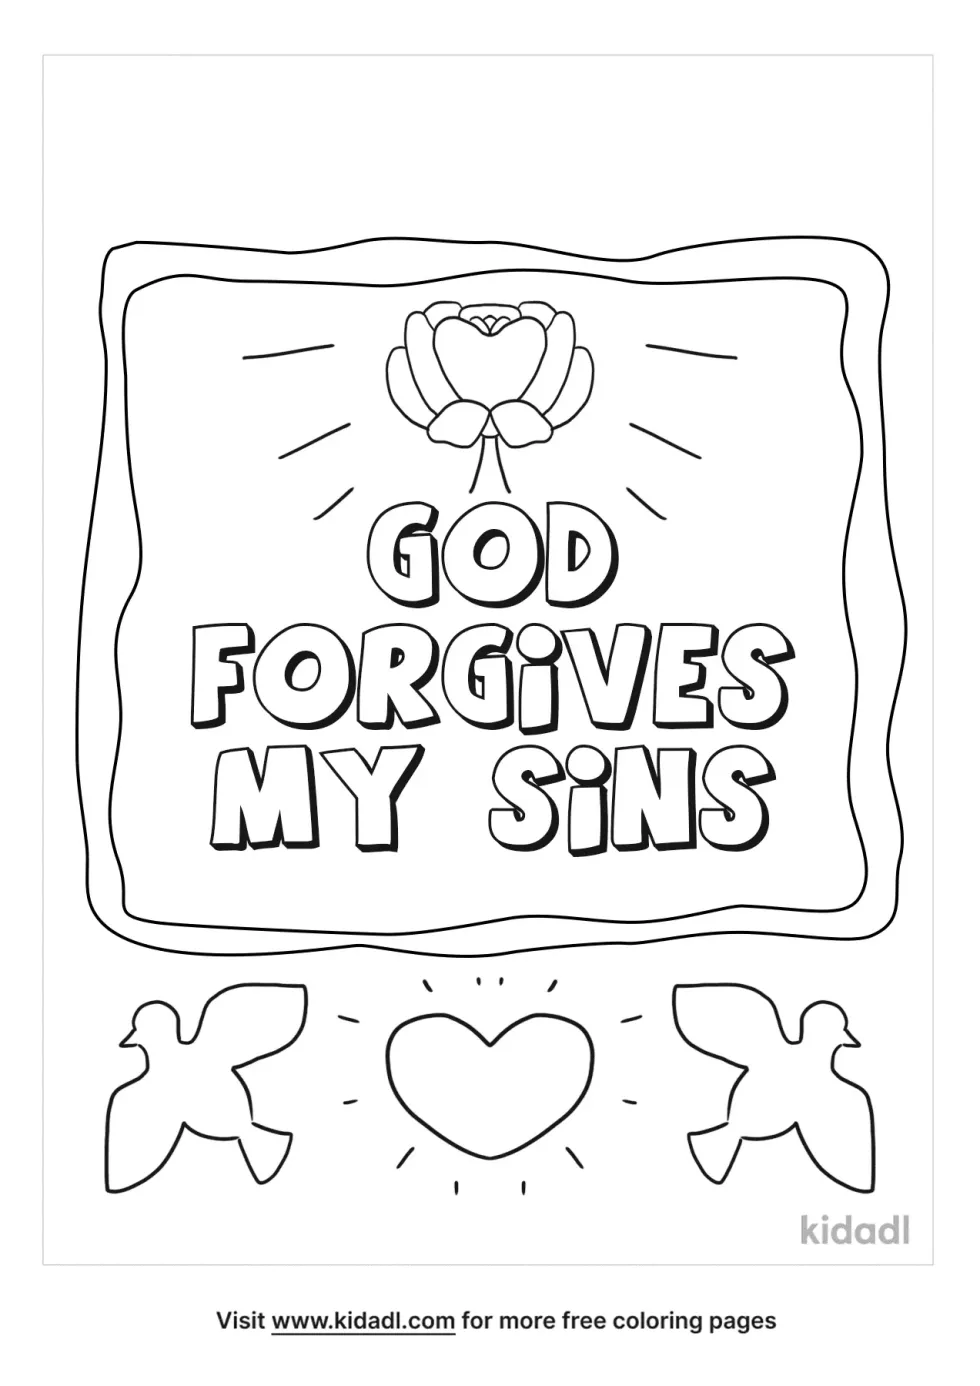 God Forgives My Sin Coloring Page